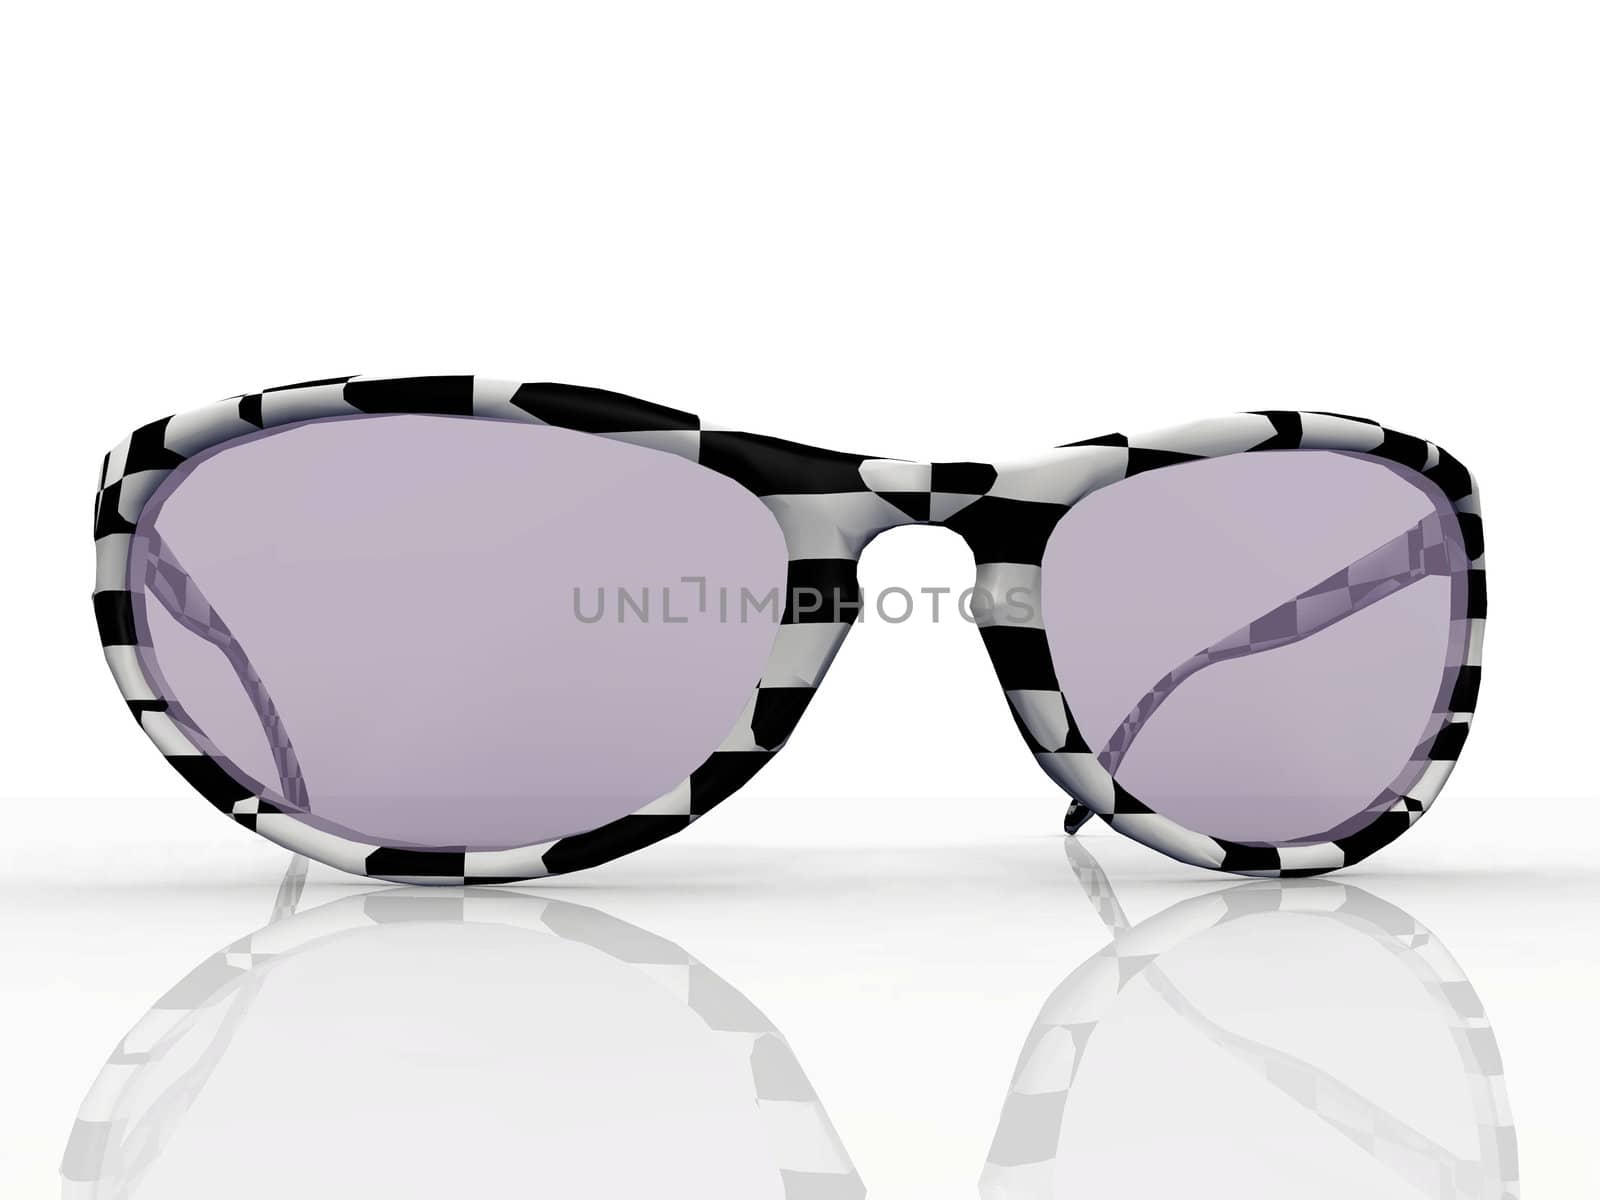 sunglasses  on a white background by njaj